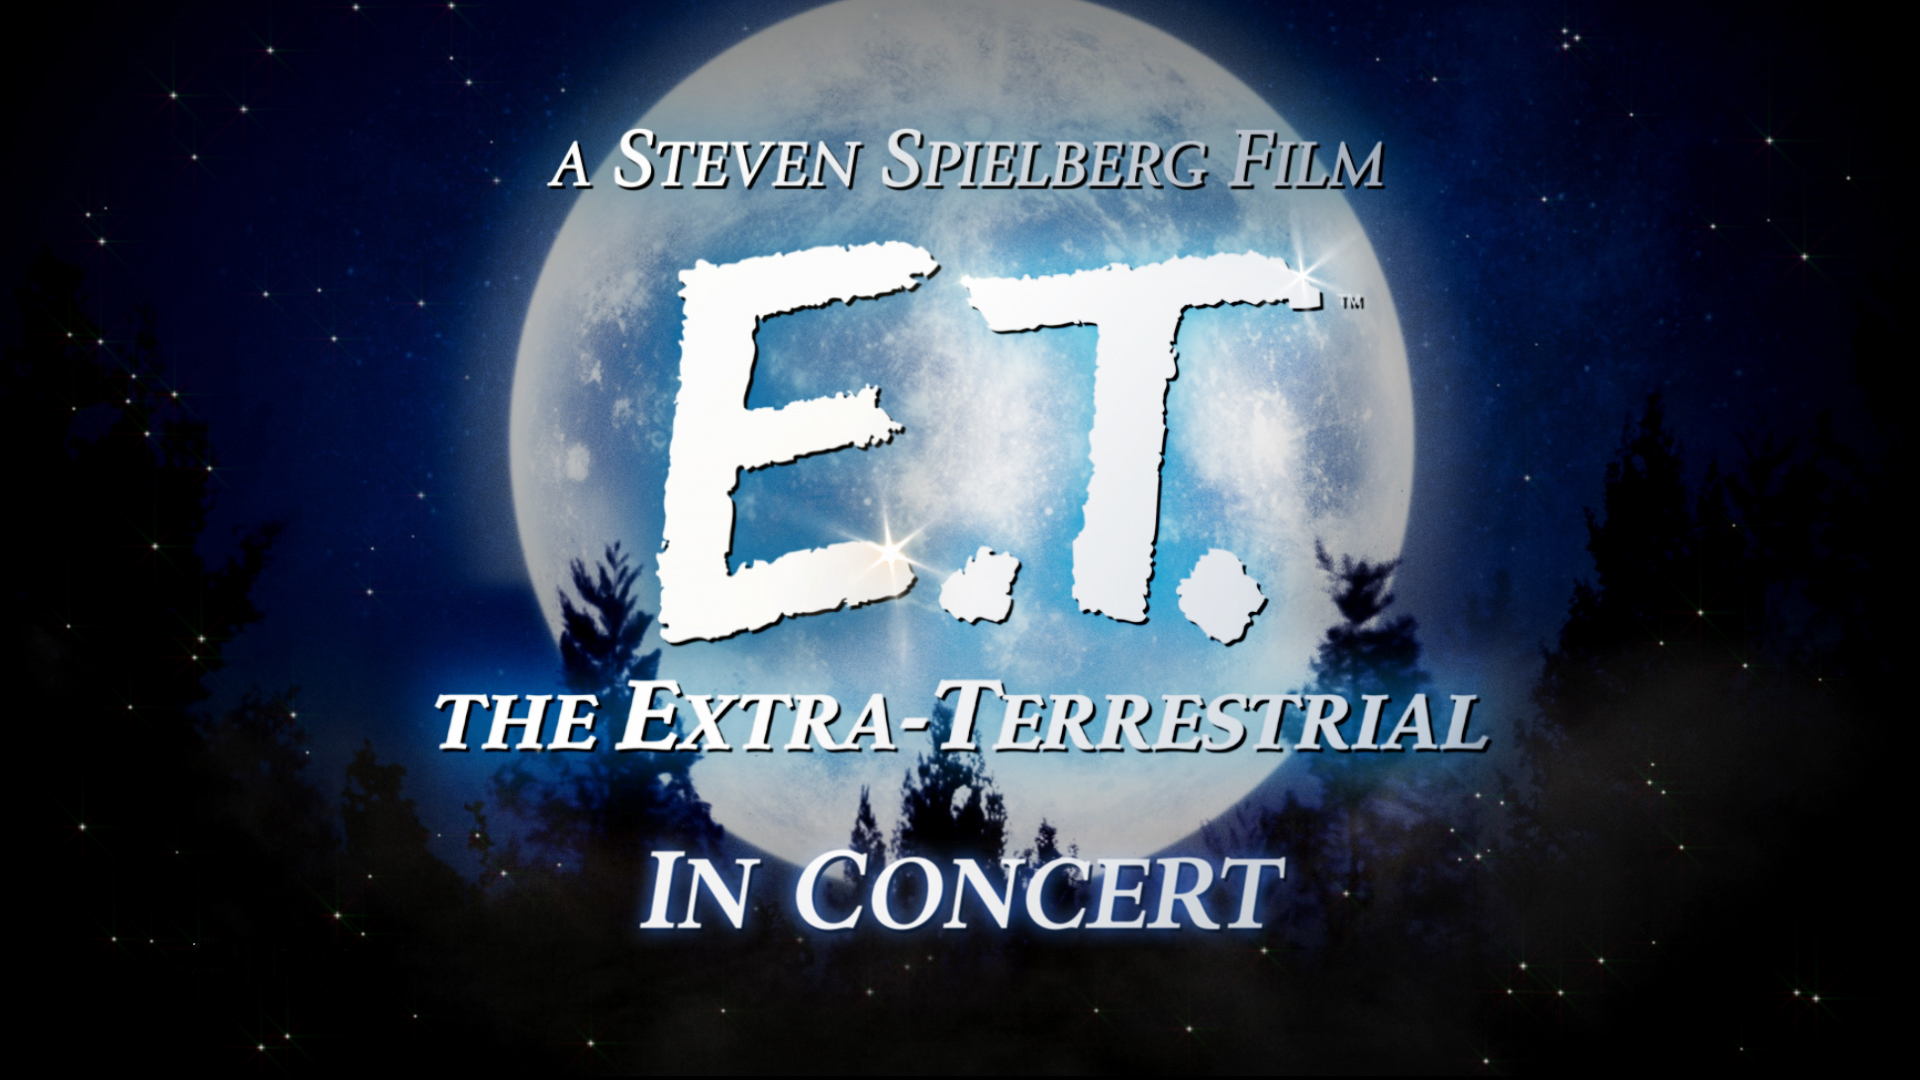 A large moon and text: A Steven Spielberg Film, E.T. the Extra-Terrestrial in concert